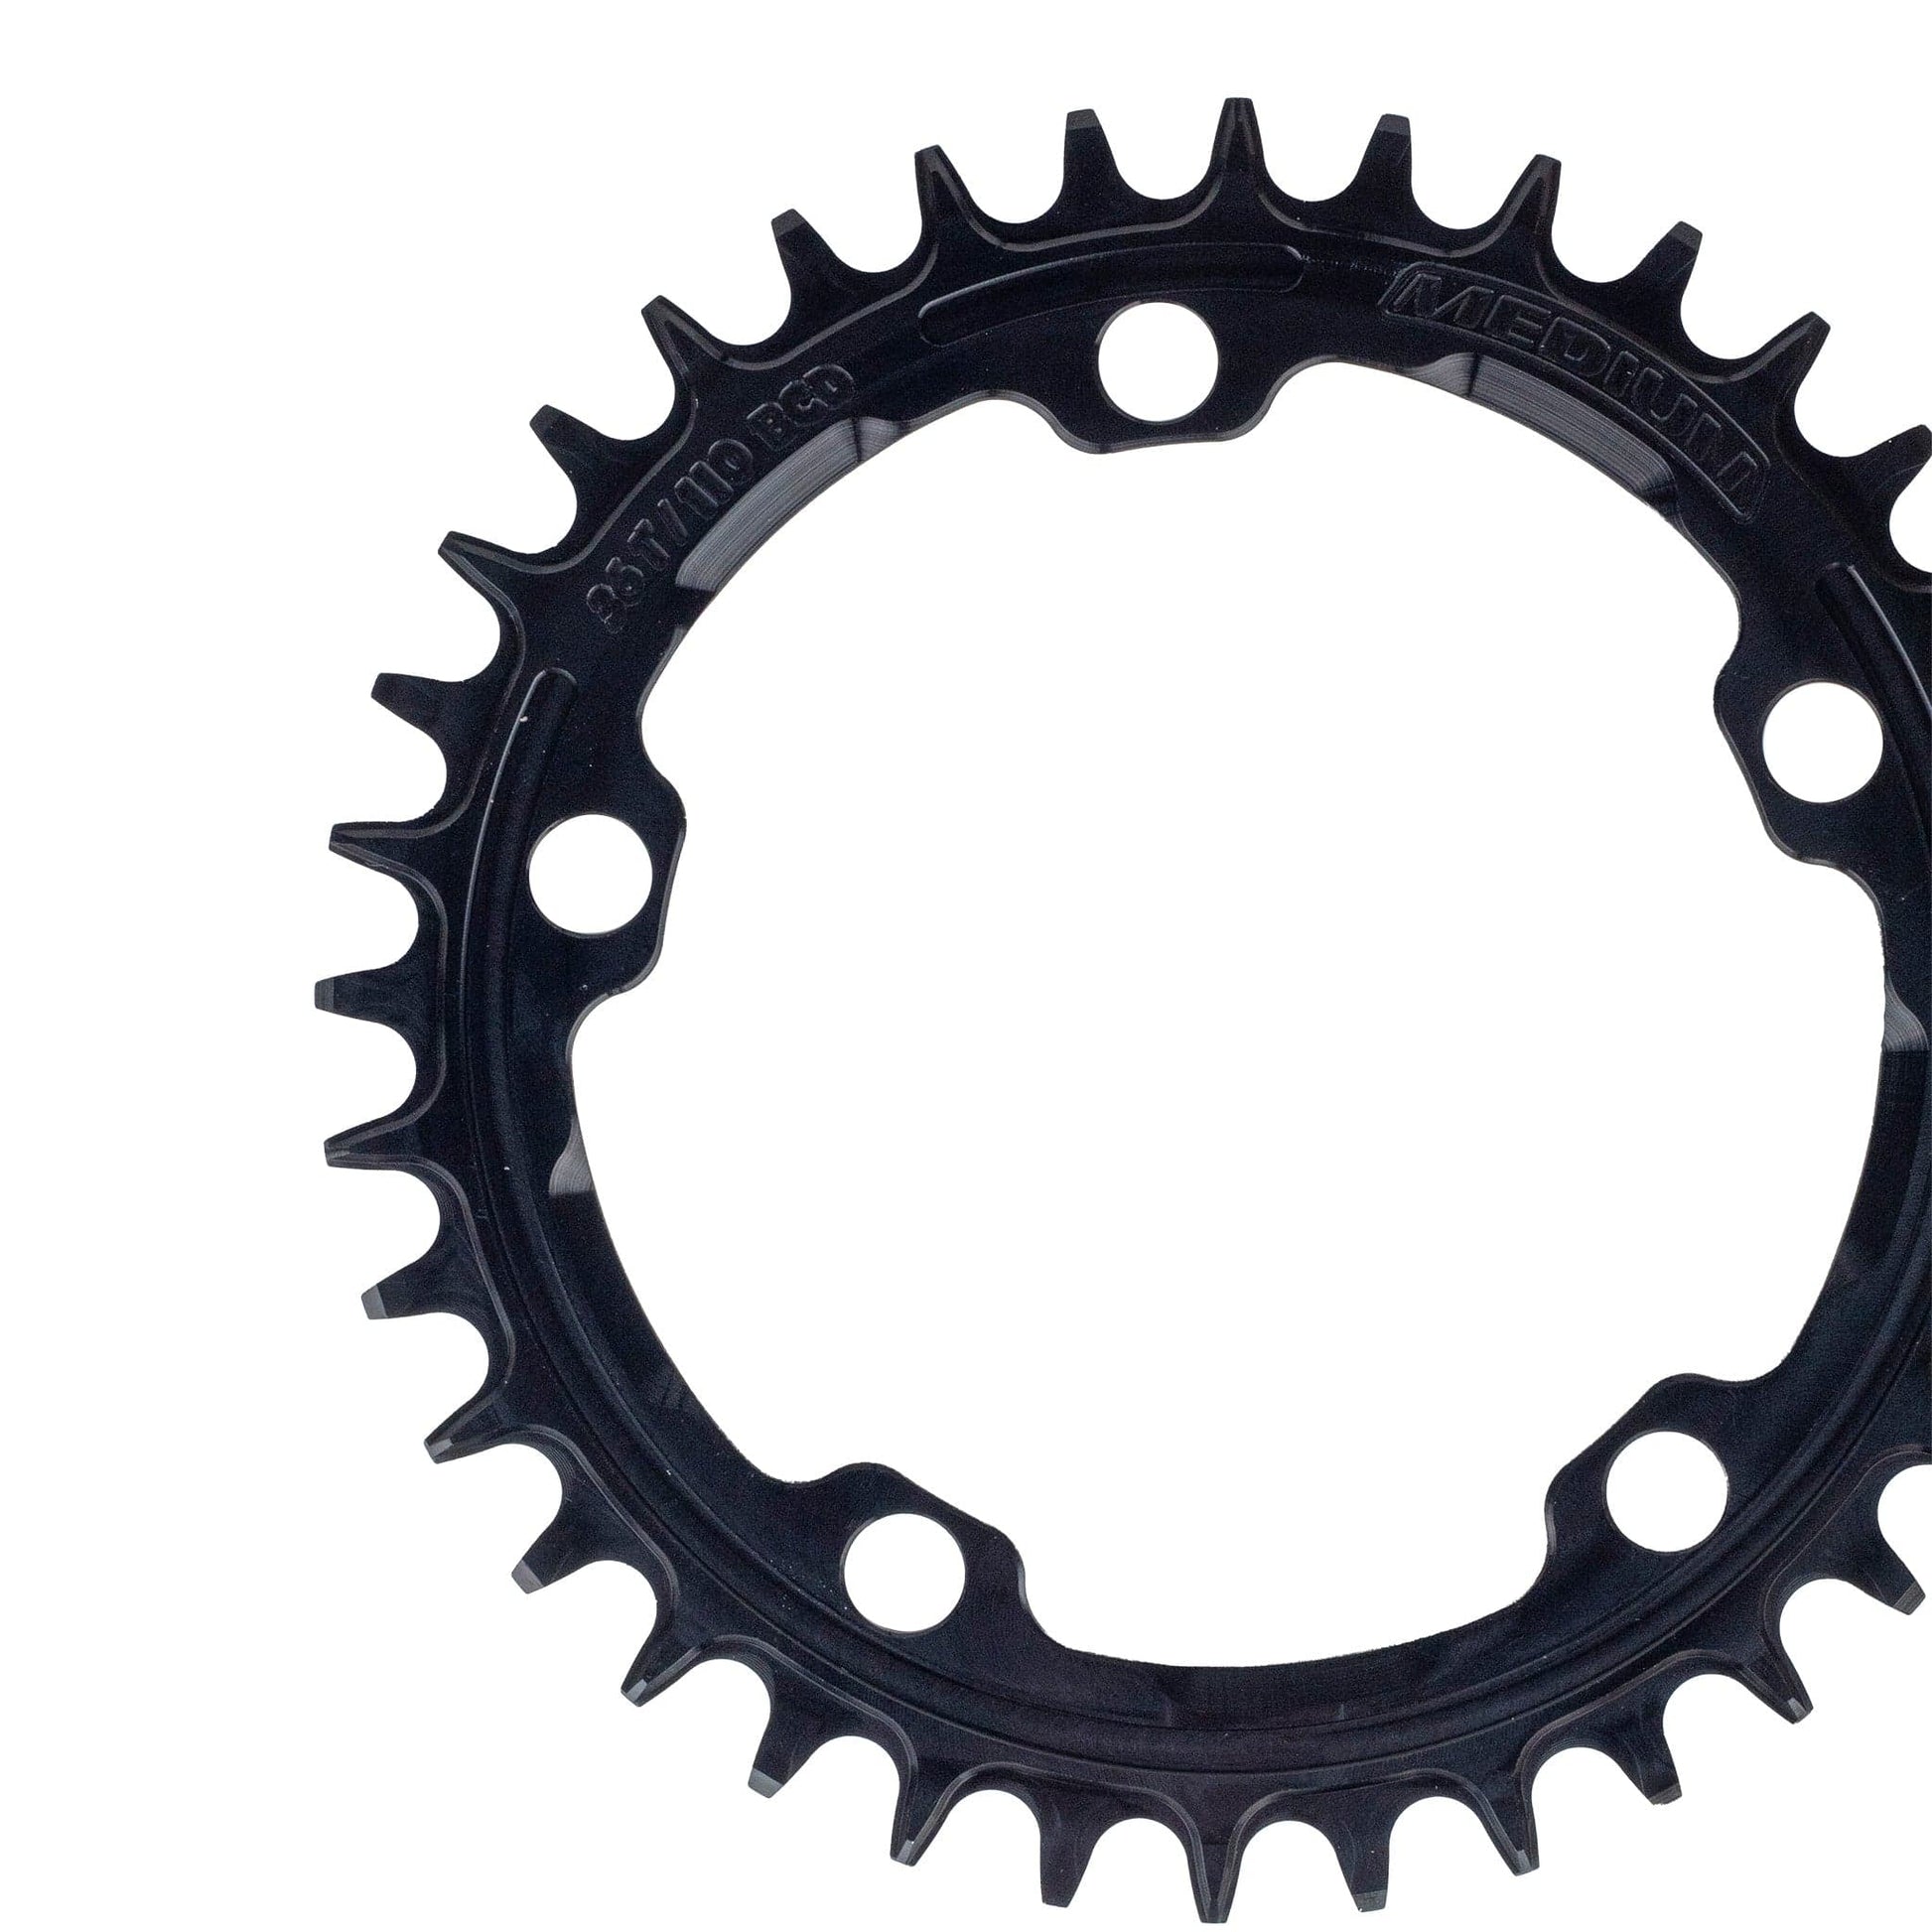 Narrow Wide 110 BCD // 36T 5-Bolt Chainring